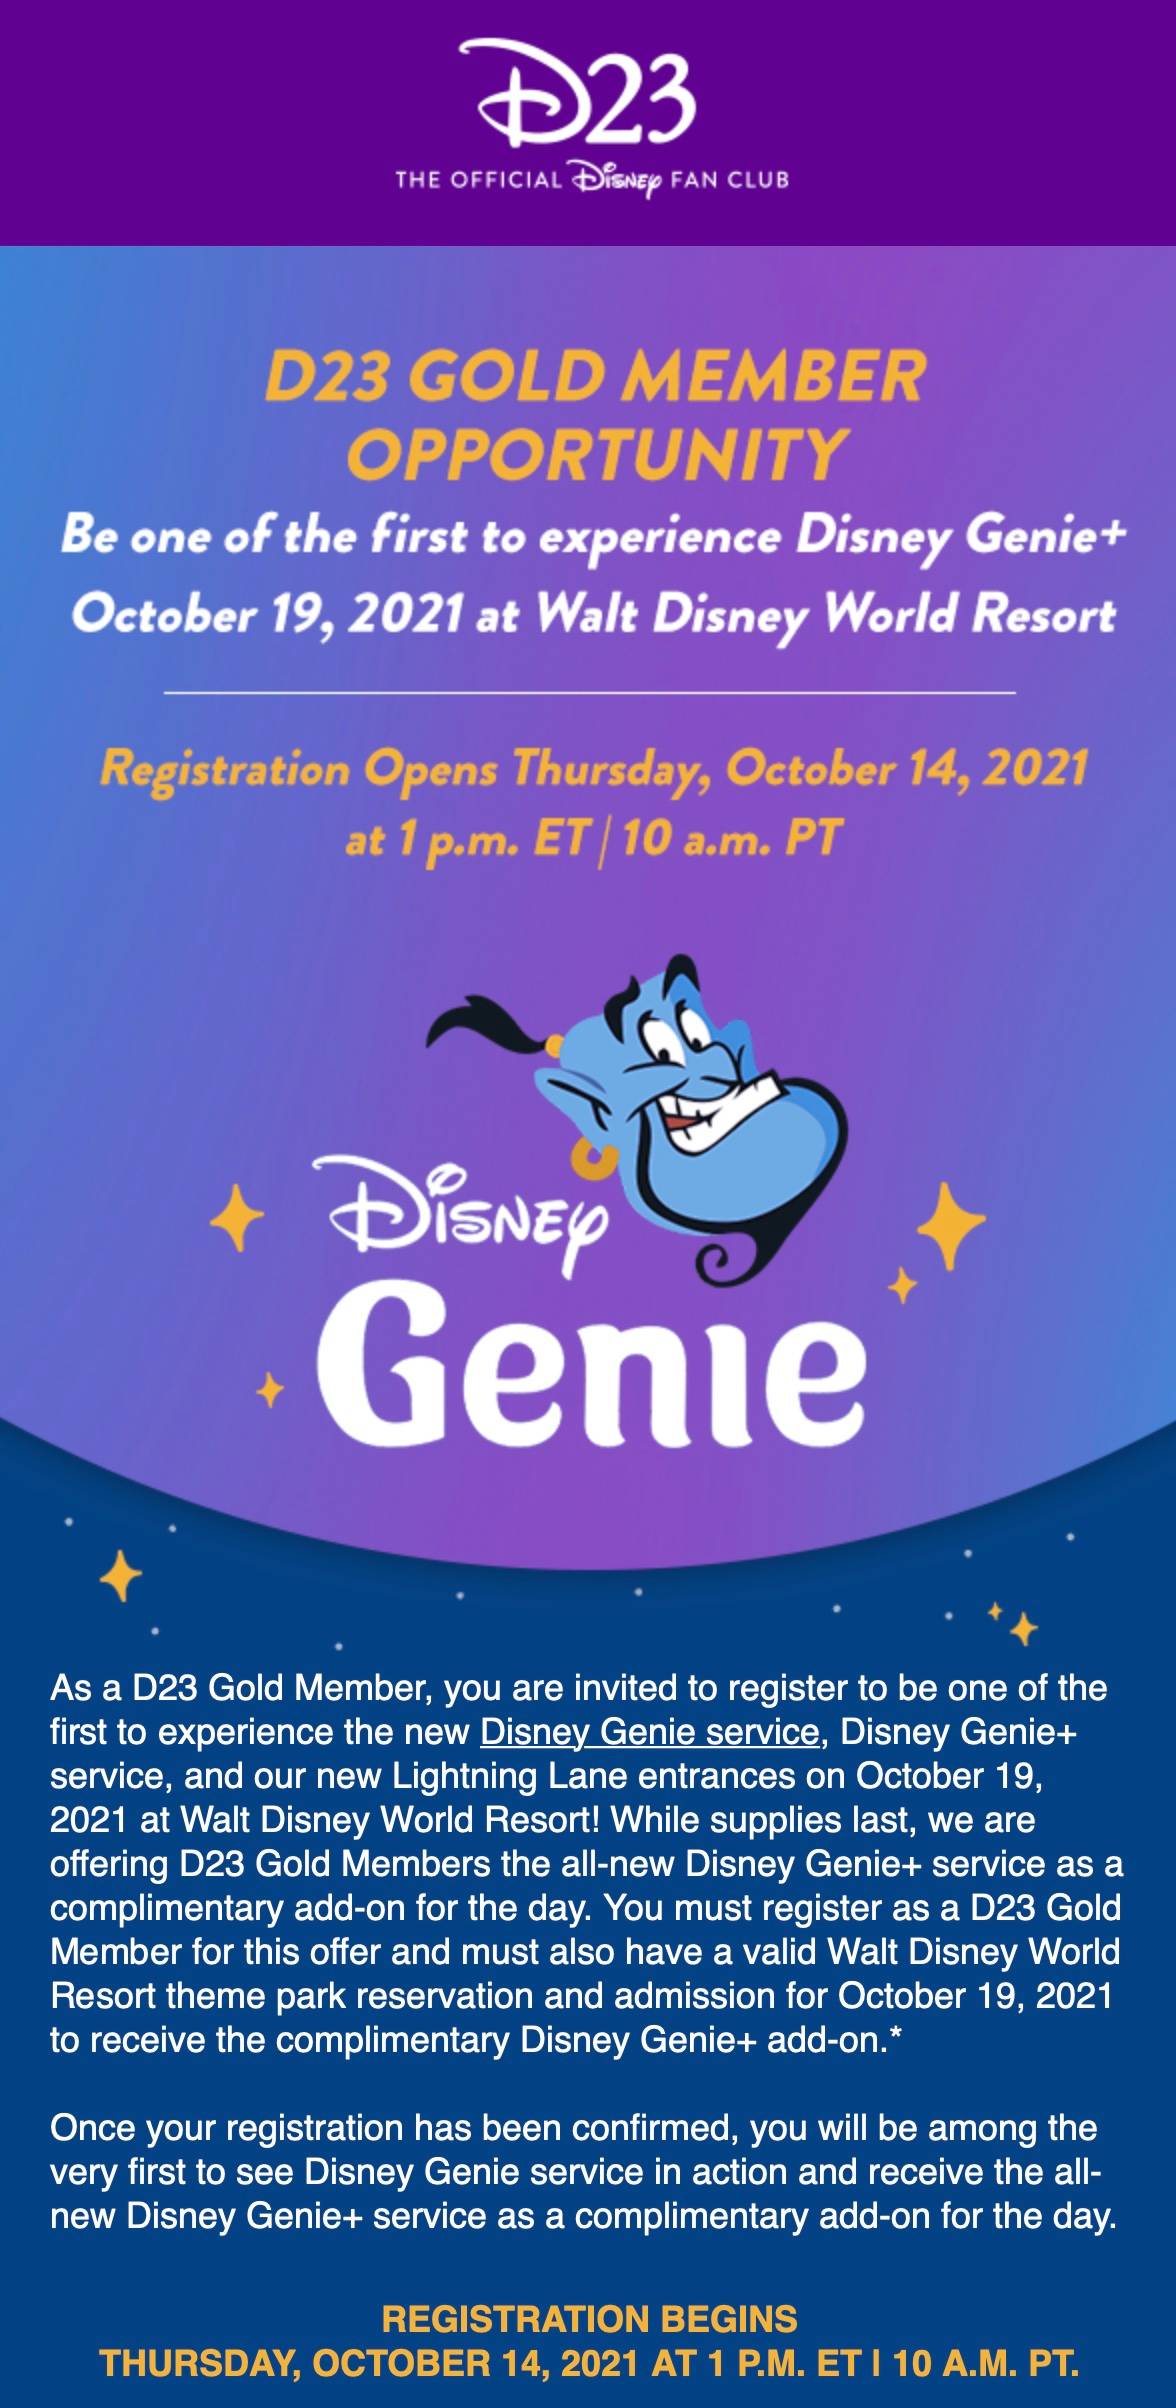 D23 Gold Members can register for a complimentary Disney Genie+ add-on for  the debut of the new service at Walt Disney World